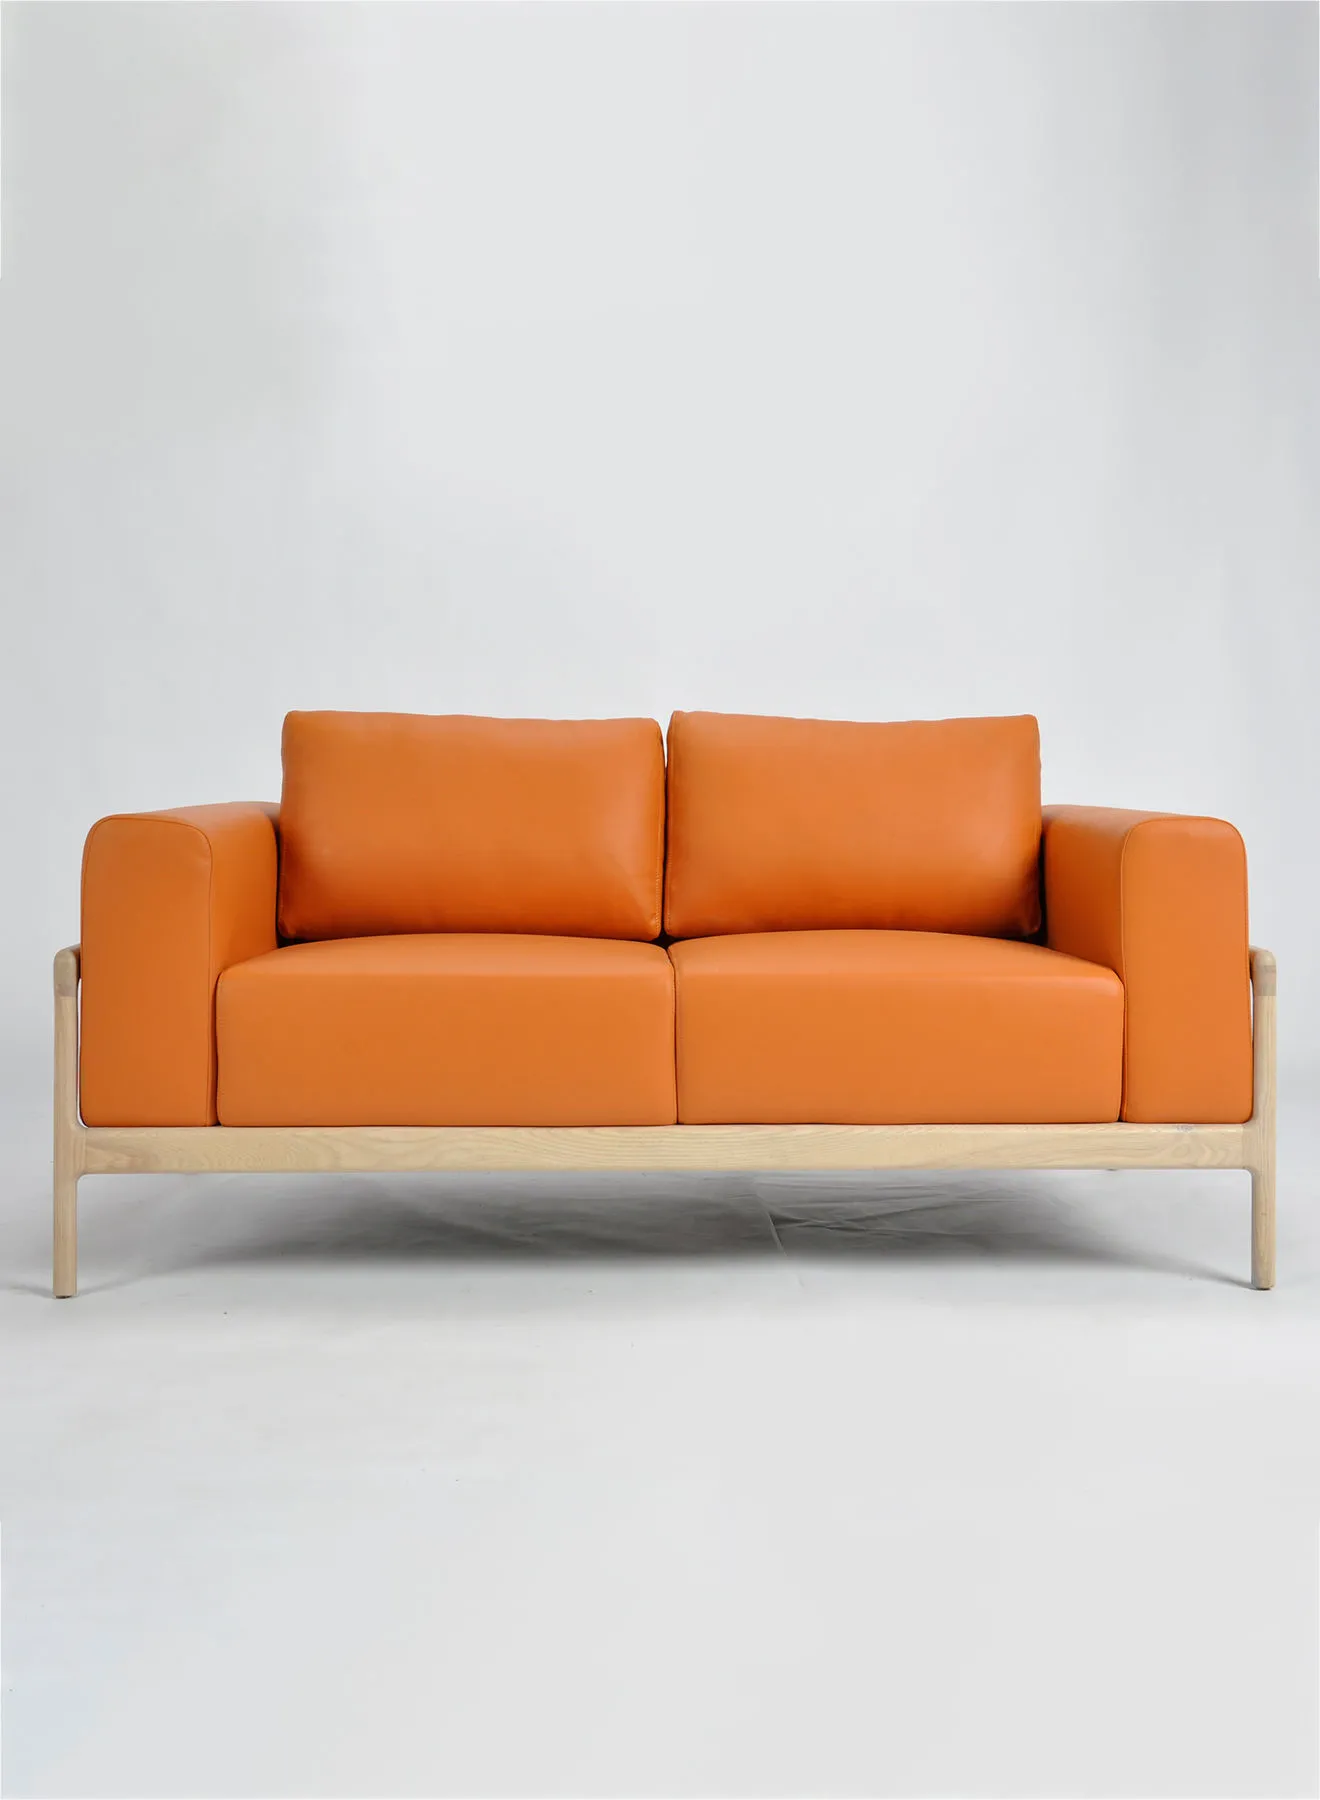 Switch Sofa - Orange Wood Couch - 163X88X70 - 2 Seater Sofa Relaxing Sofa